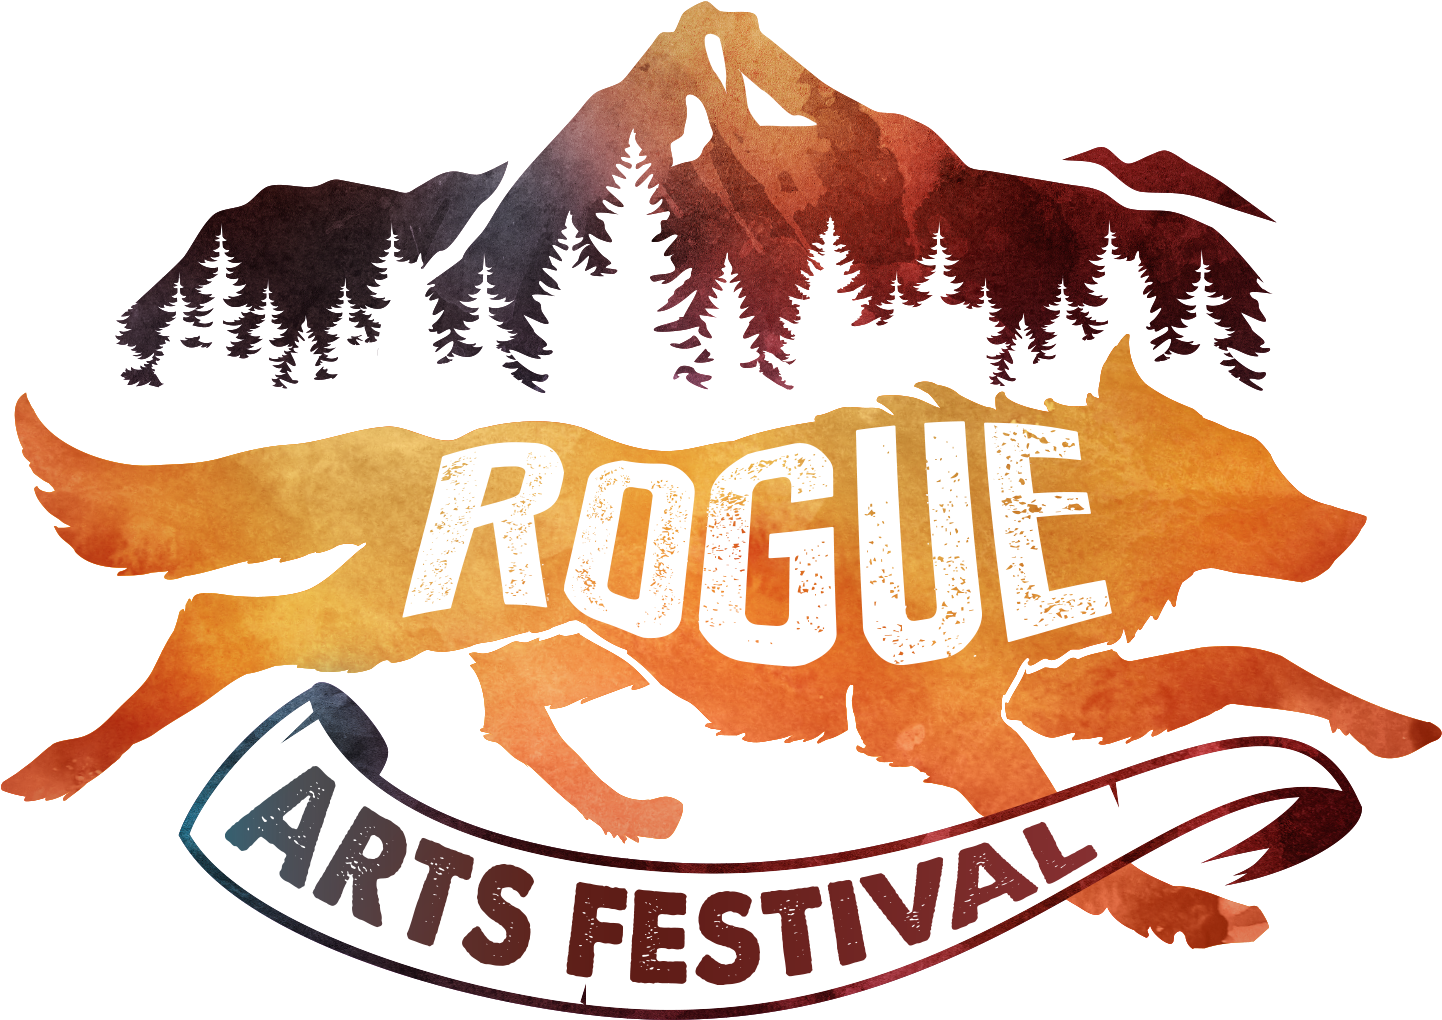 The Coast Rogue Arts Society Presents The 3-day, Outdoor, - Sunshine Coast, Queensland (1471x1058)